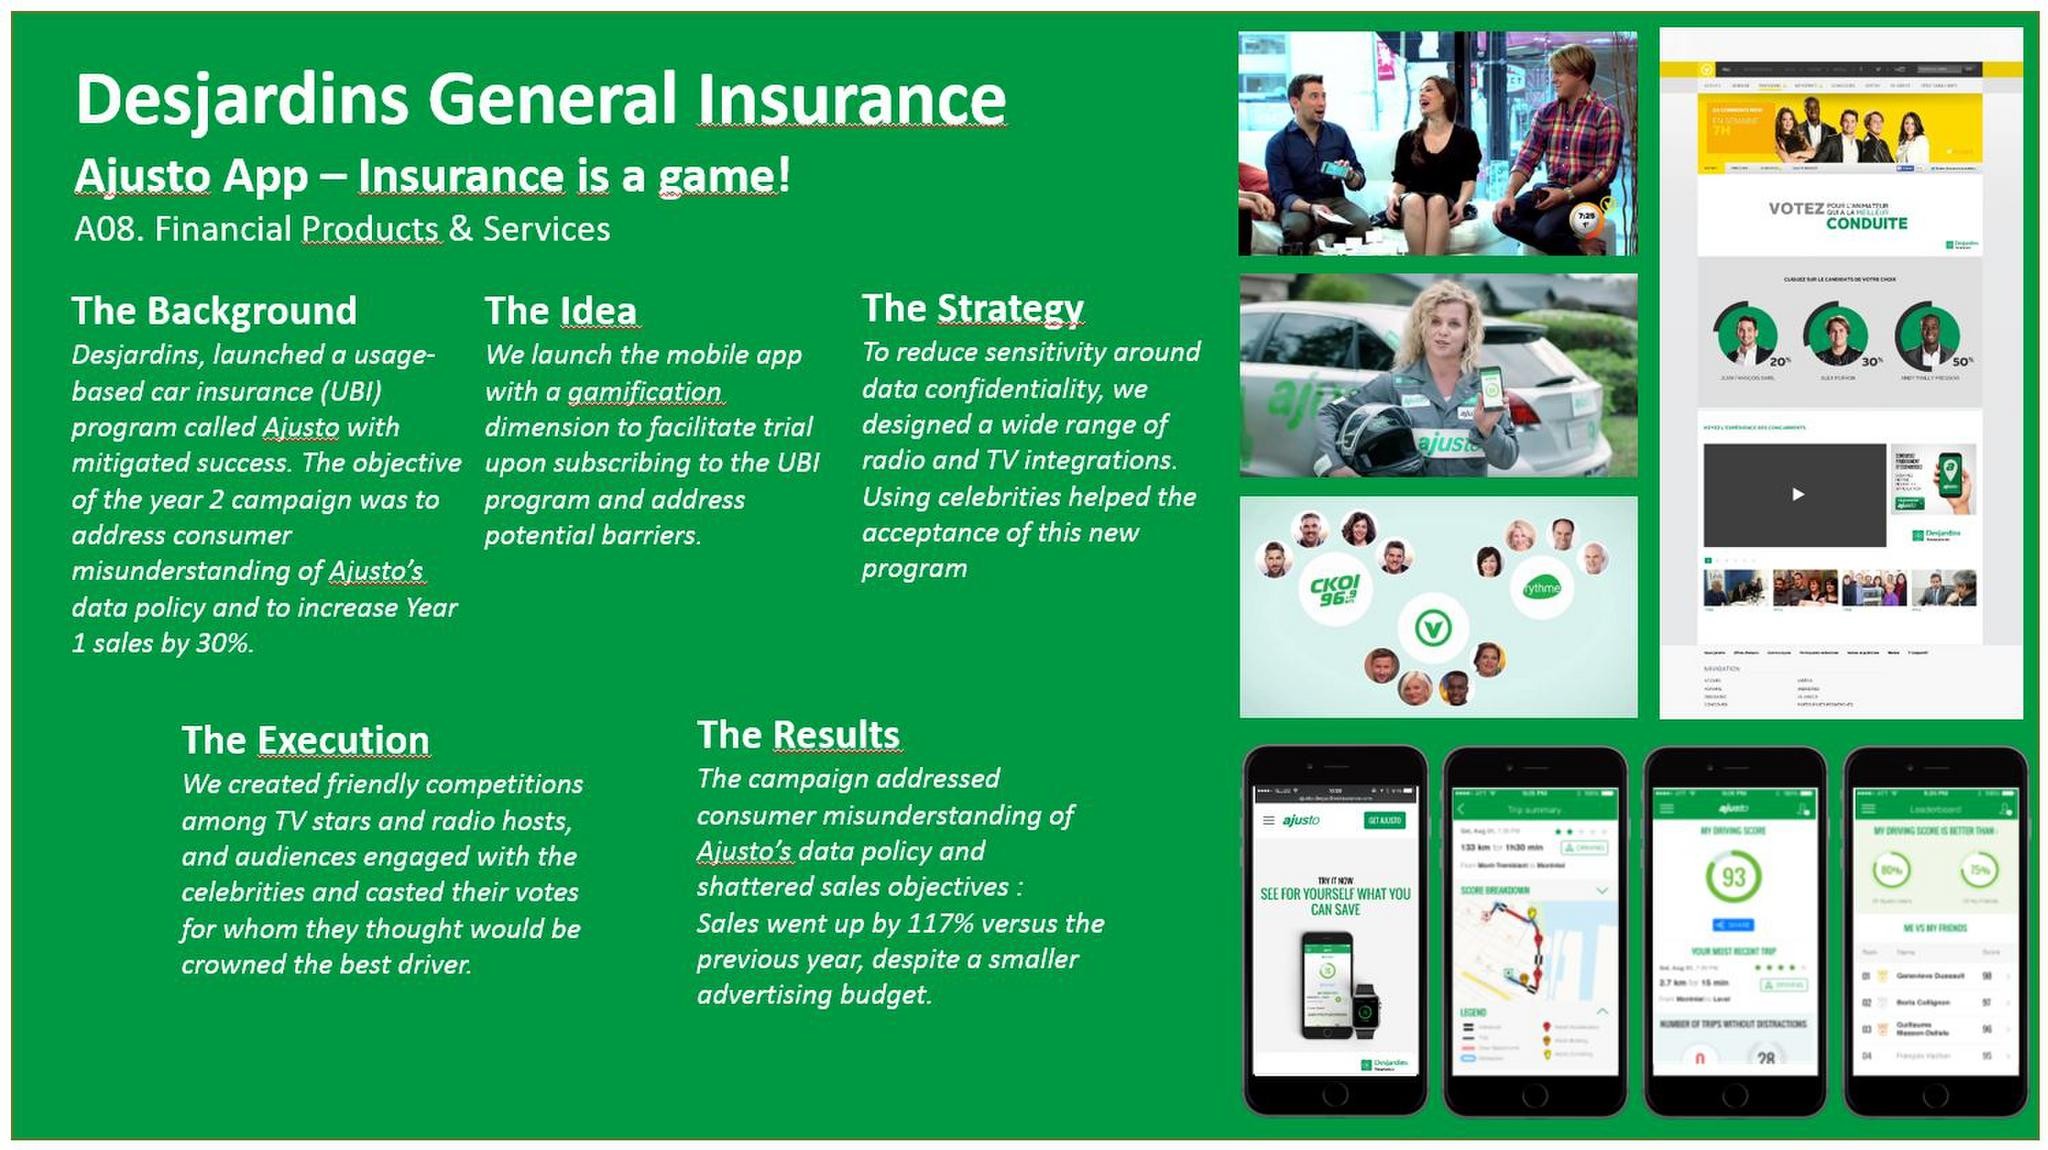 Ajusto app - Insurance is a game!